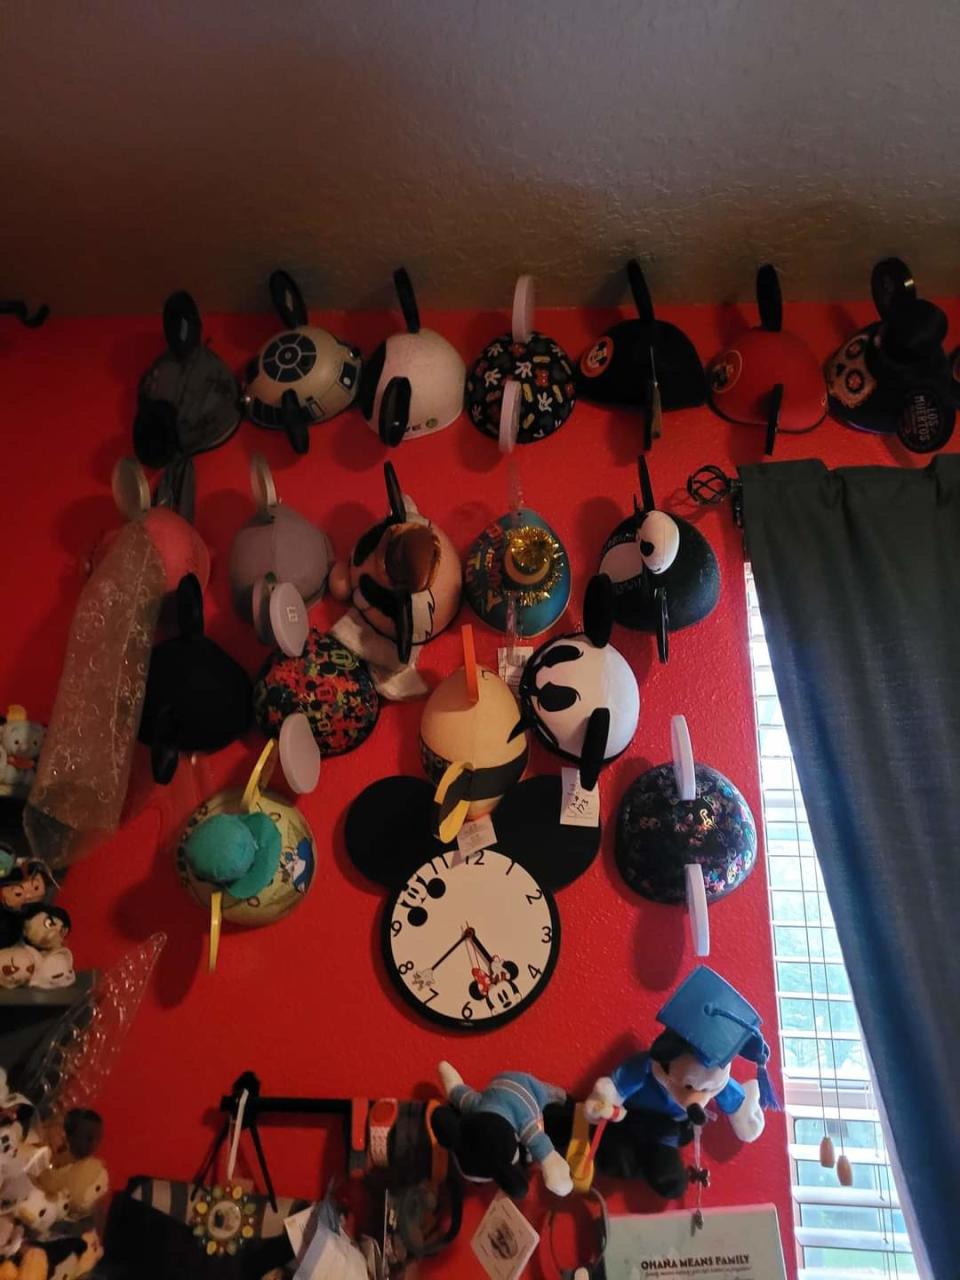 Mouse ears adorn a wall in Shelley Cartee's home.